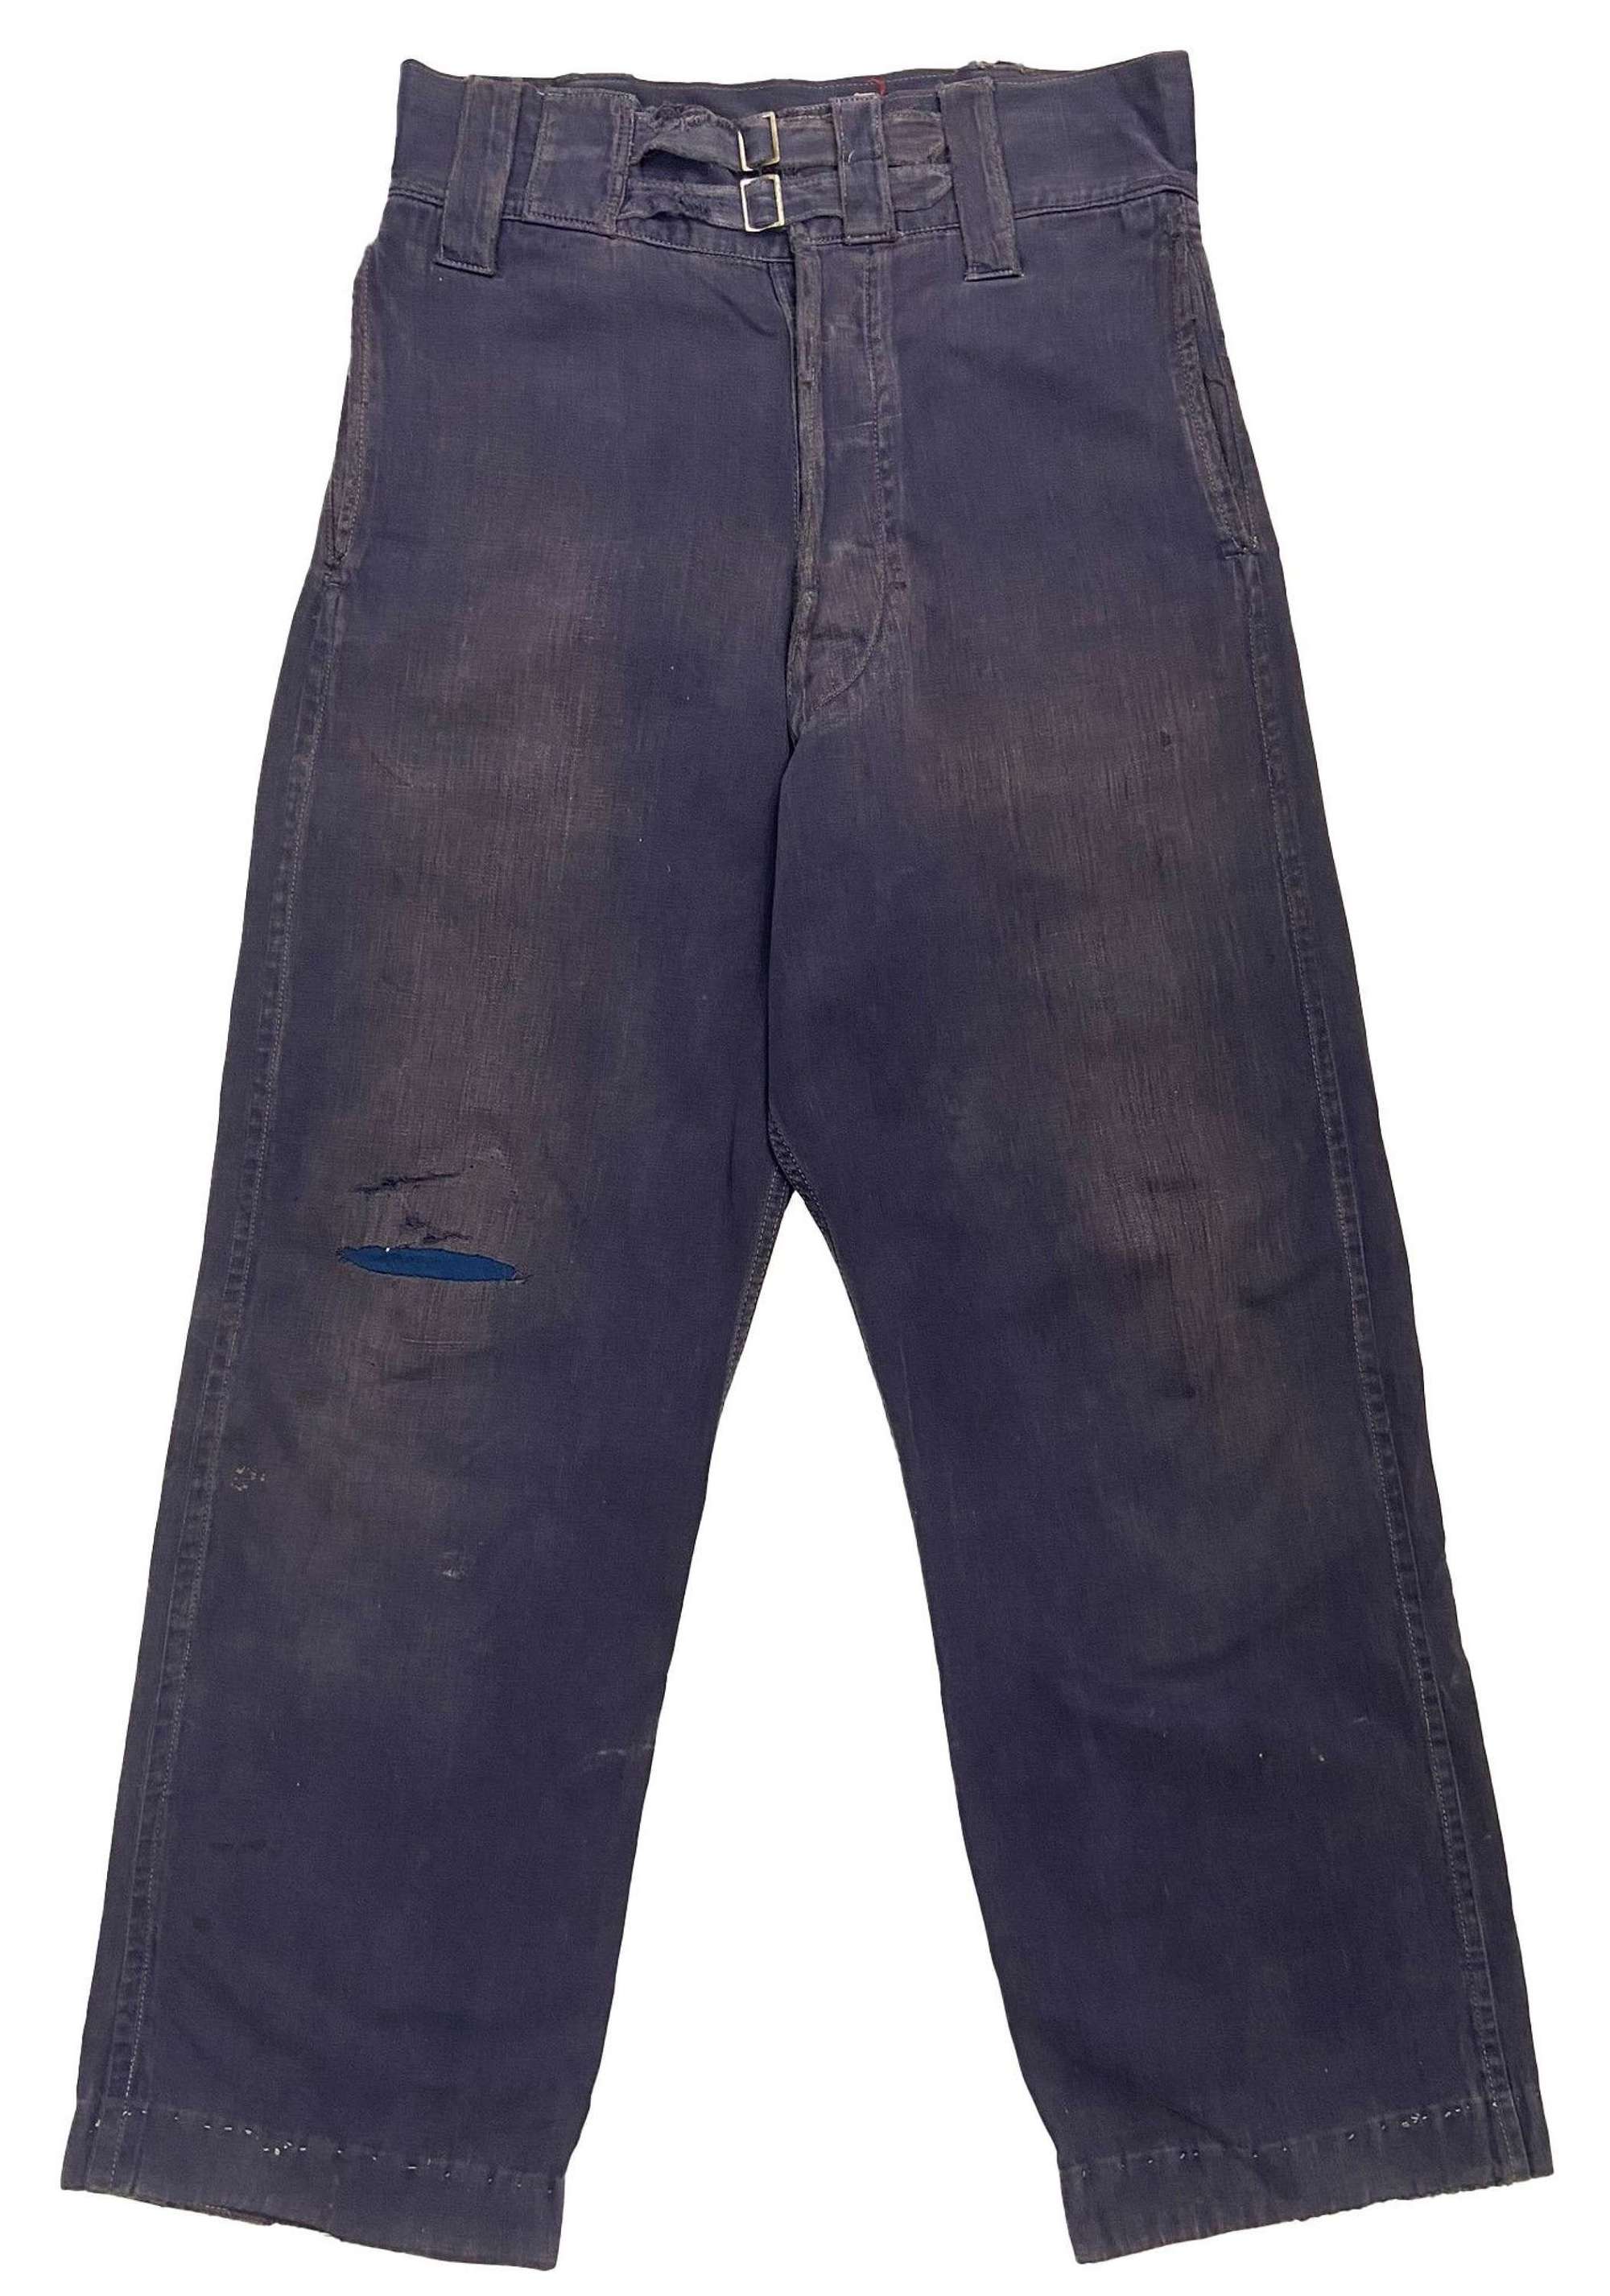 Original Royal Navy Action Working Dress Trousers